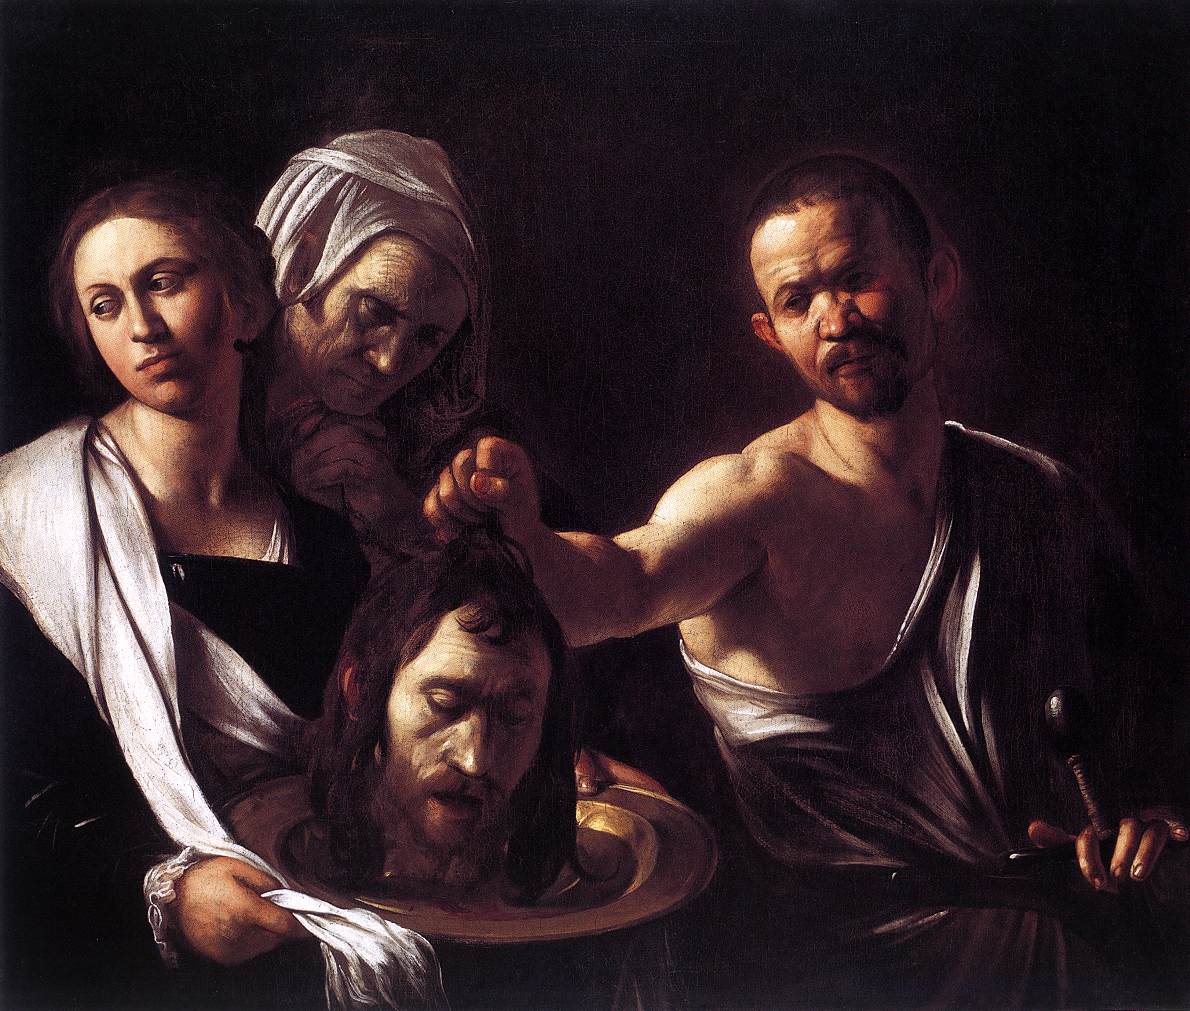 Caravaggio - Salome with the Head of John the Baptist 1607